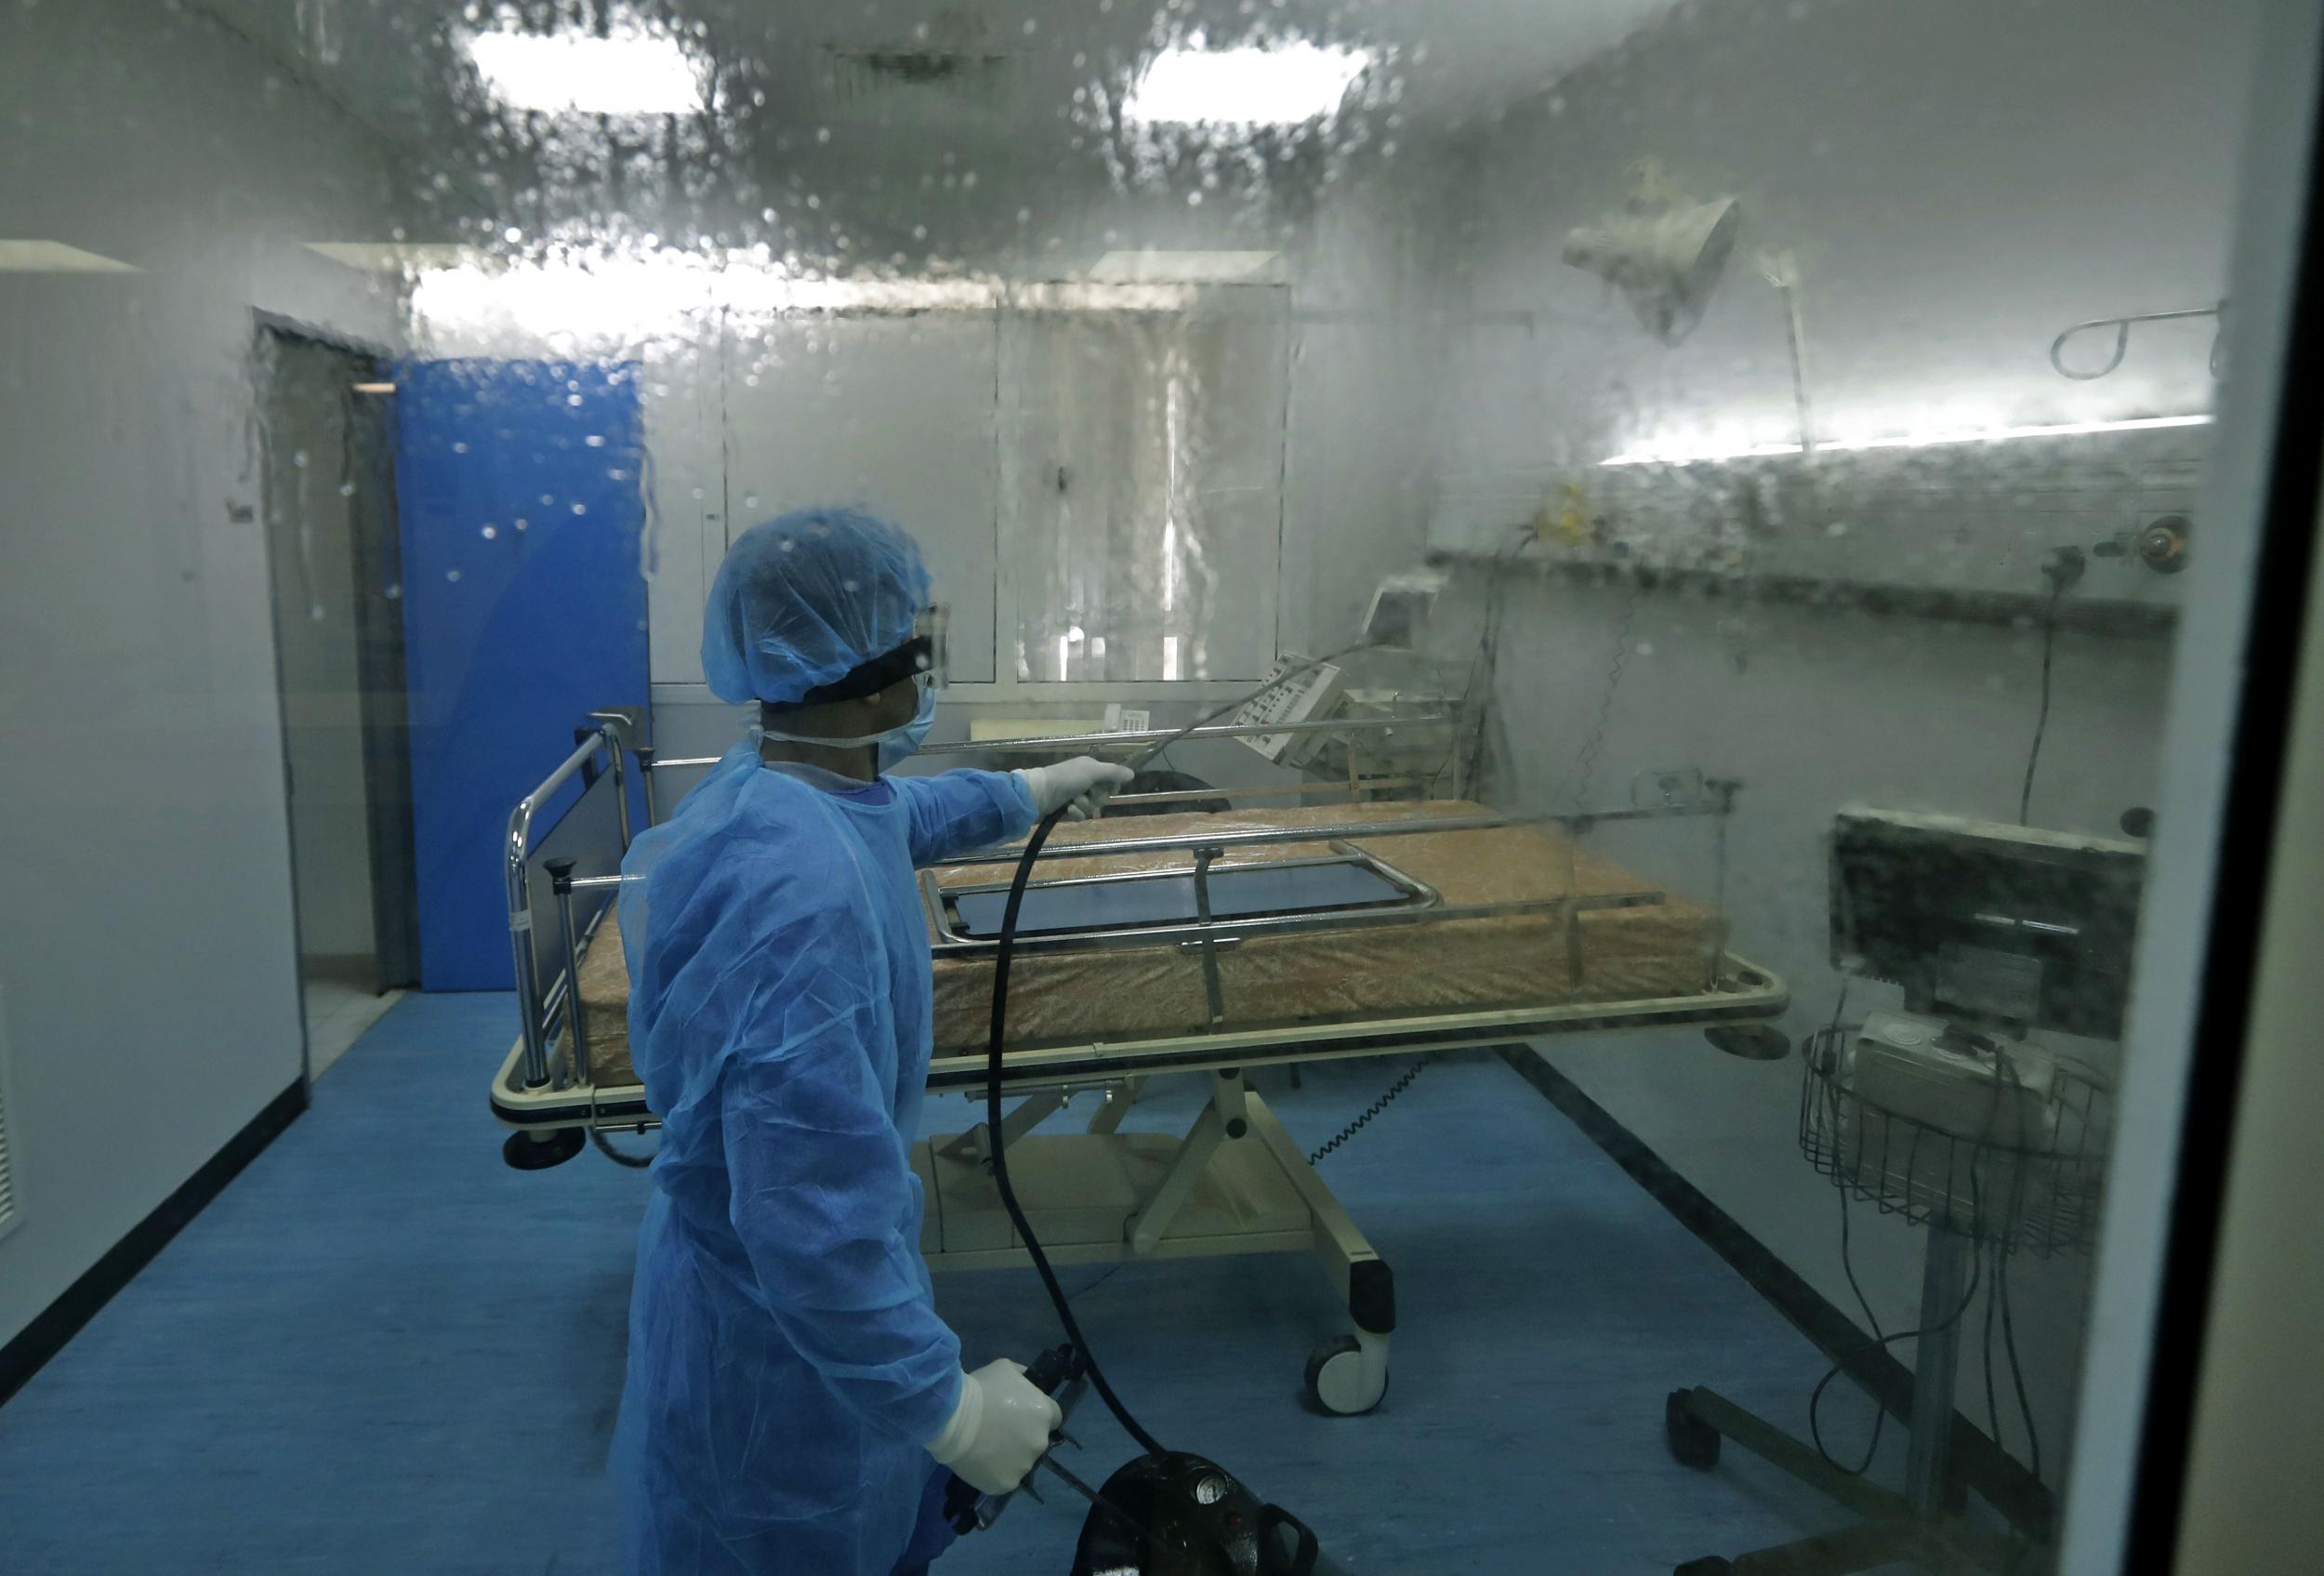 A man disinfects an intensive care isolation room at the Rafik Hariri public hospital in the Lebanese capital Beirut